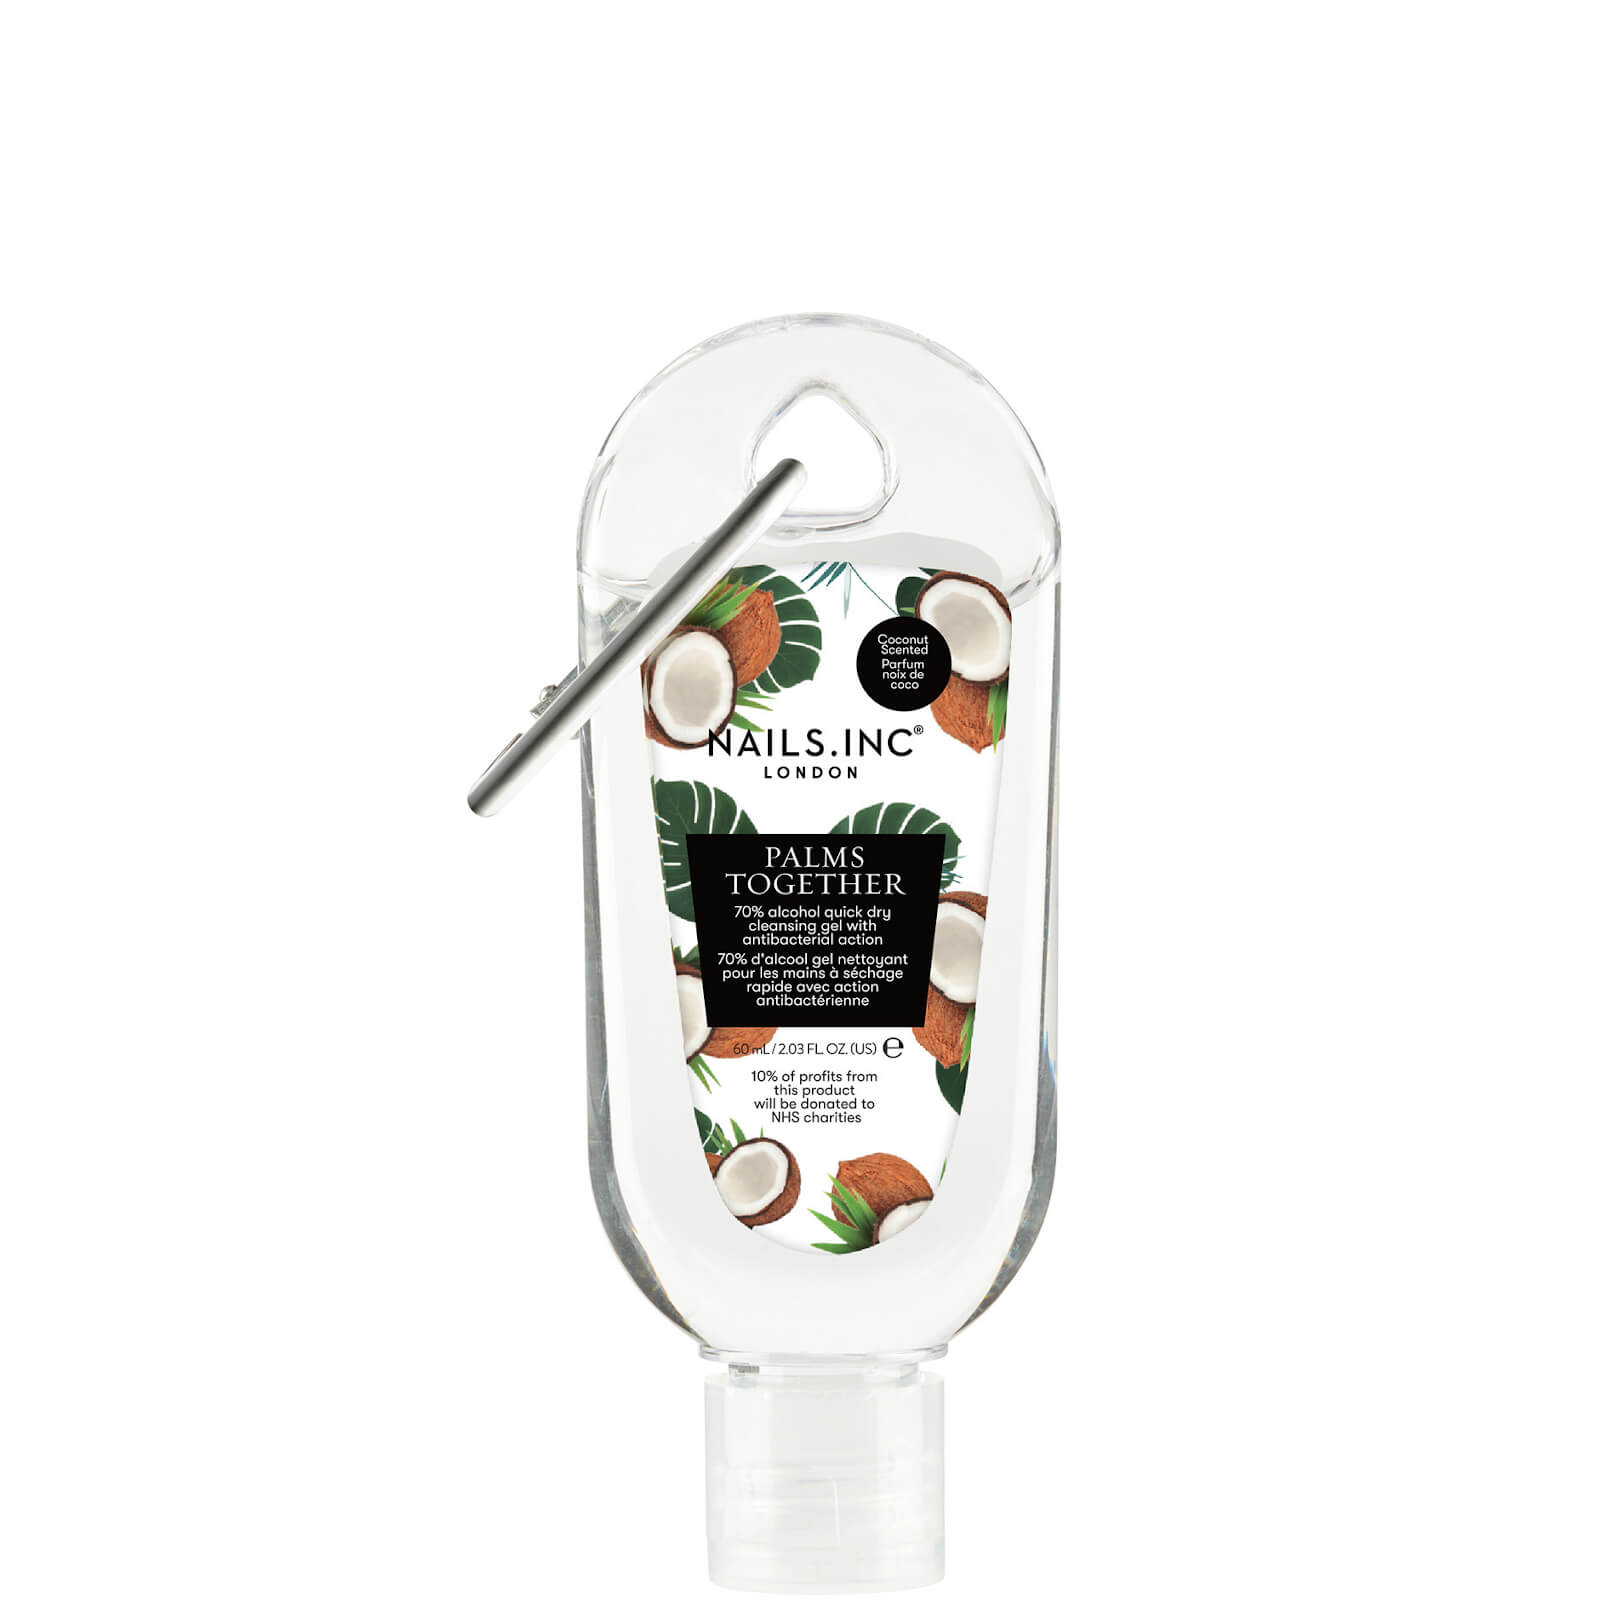 nails inc. Palms Together Cleansing Gel with Hook - Coconut Scent